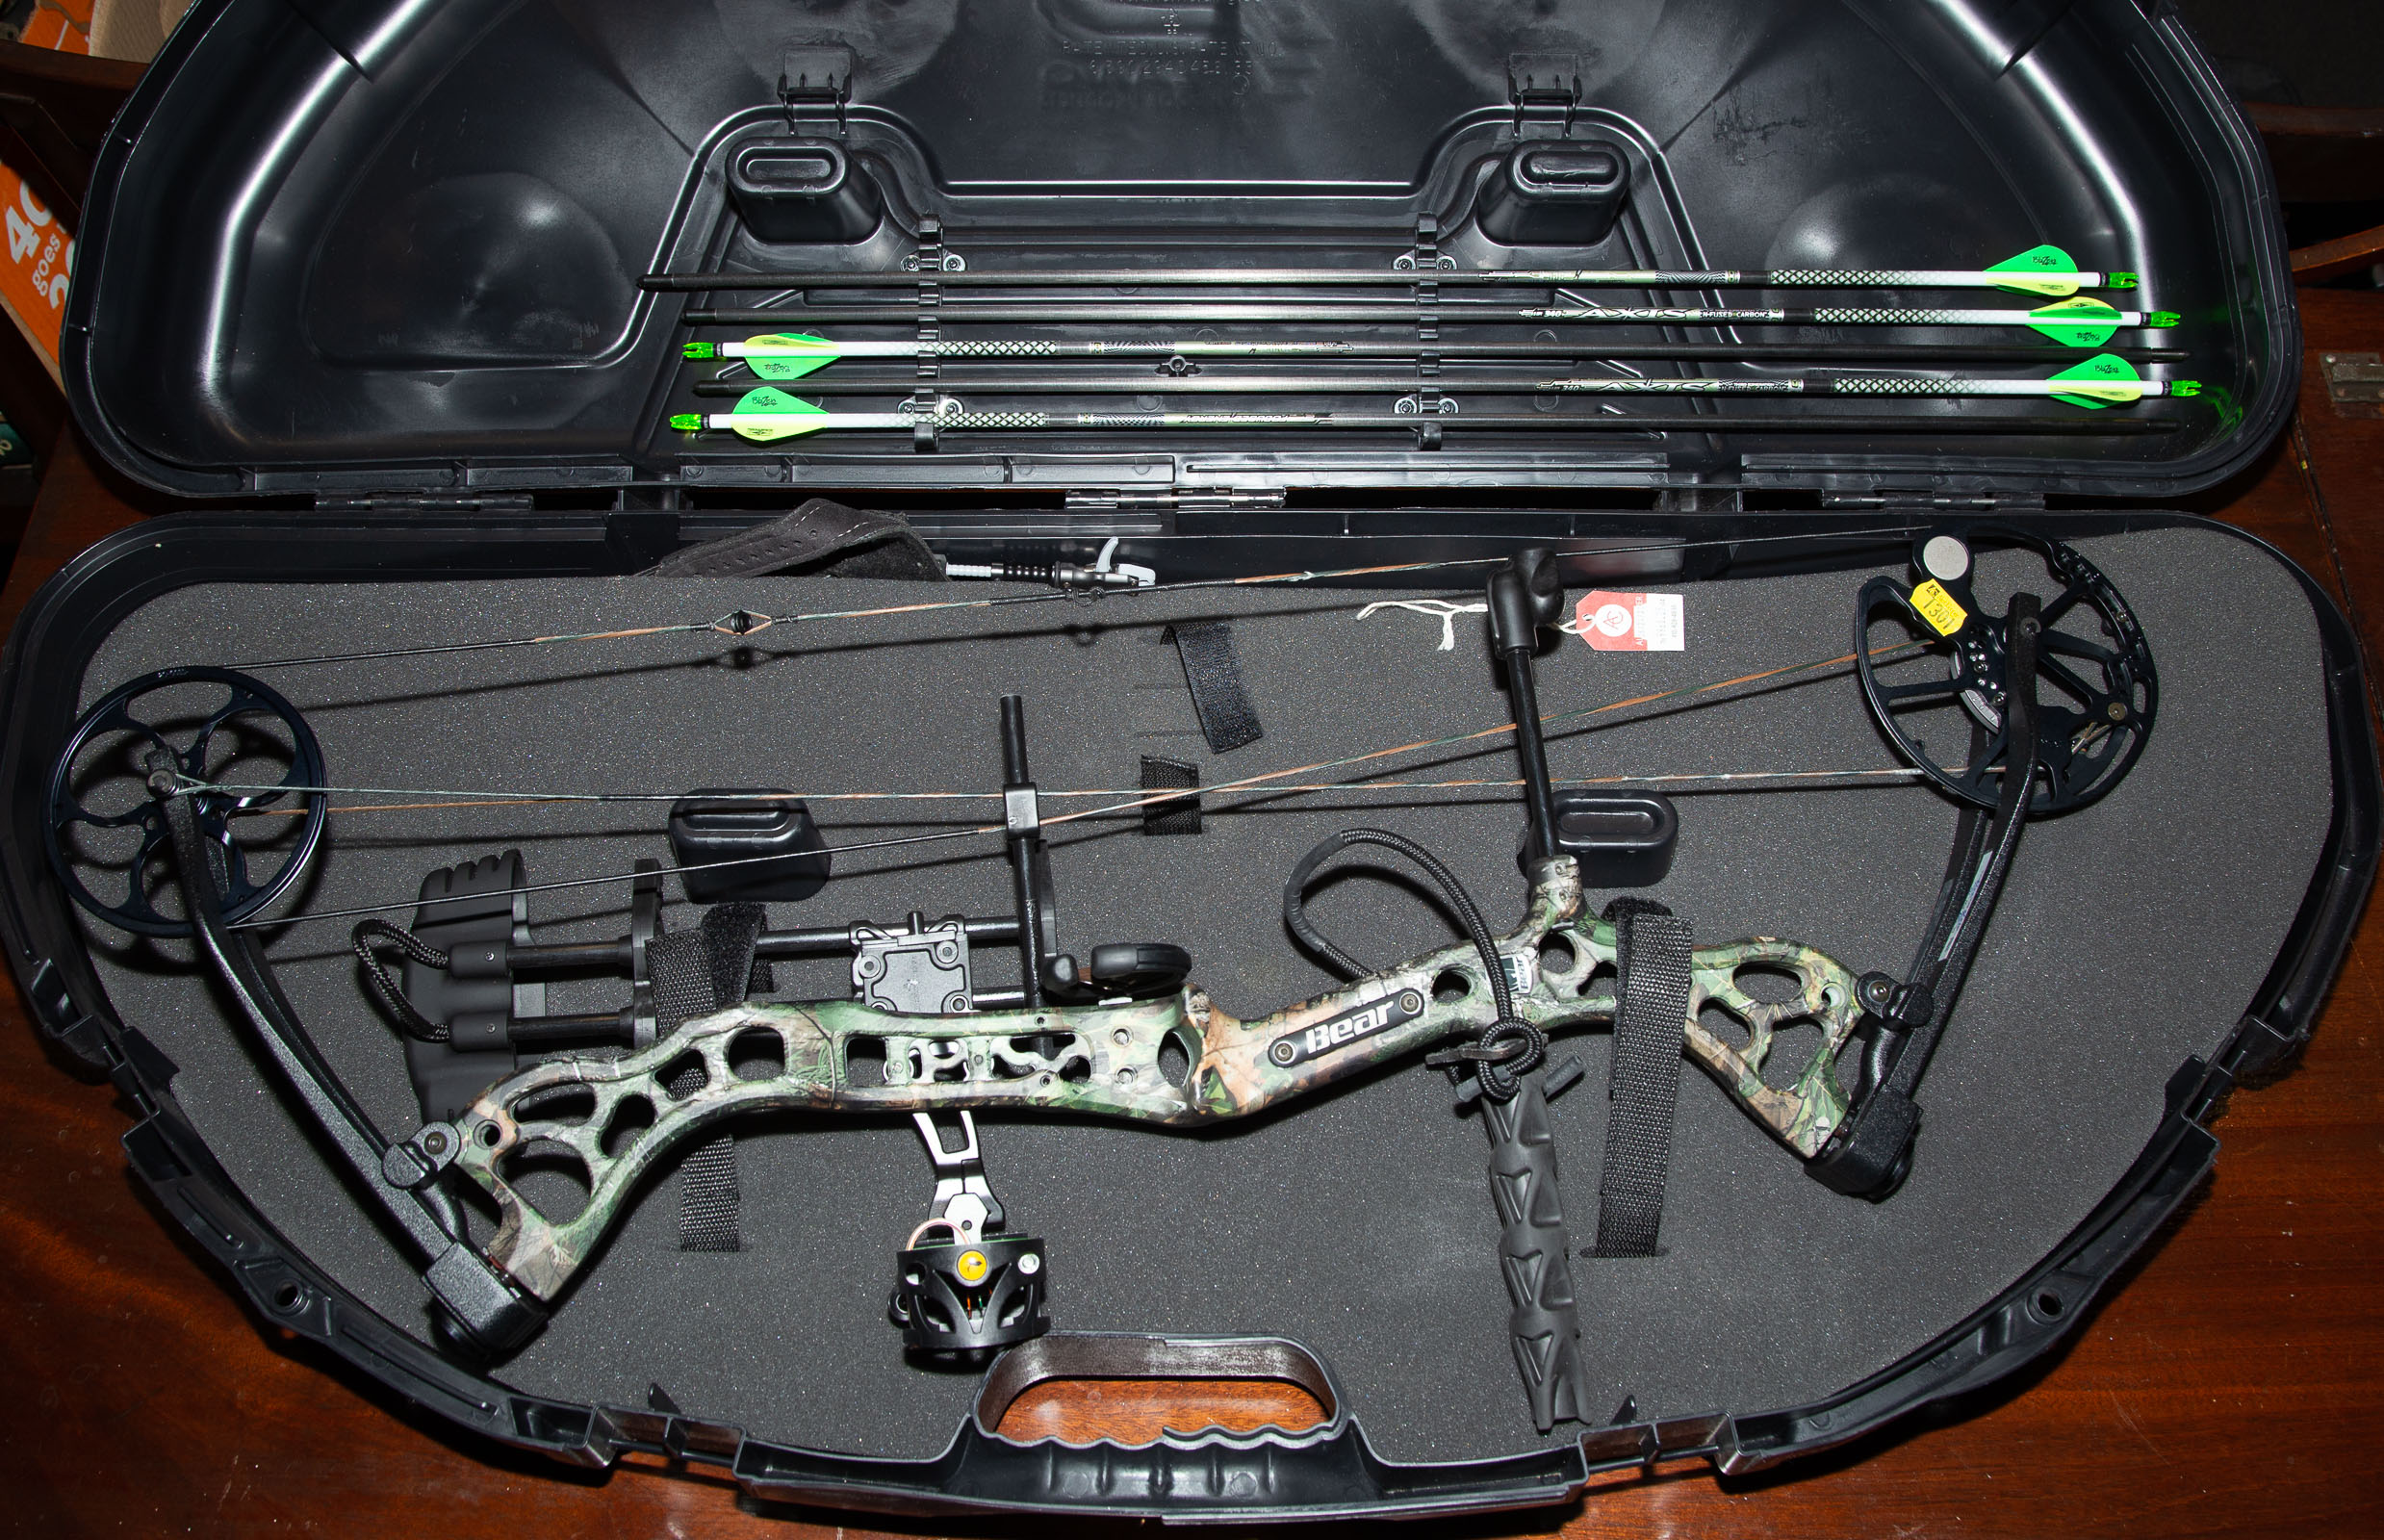 BEAR COMPOUND HUNTING BOW With 334e96